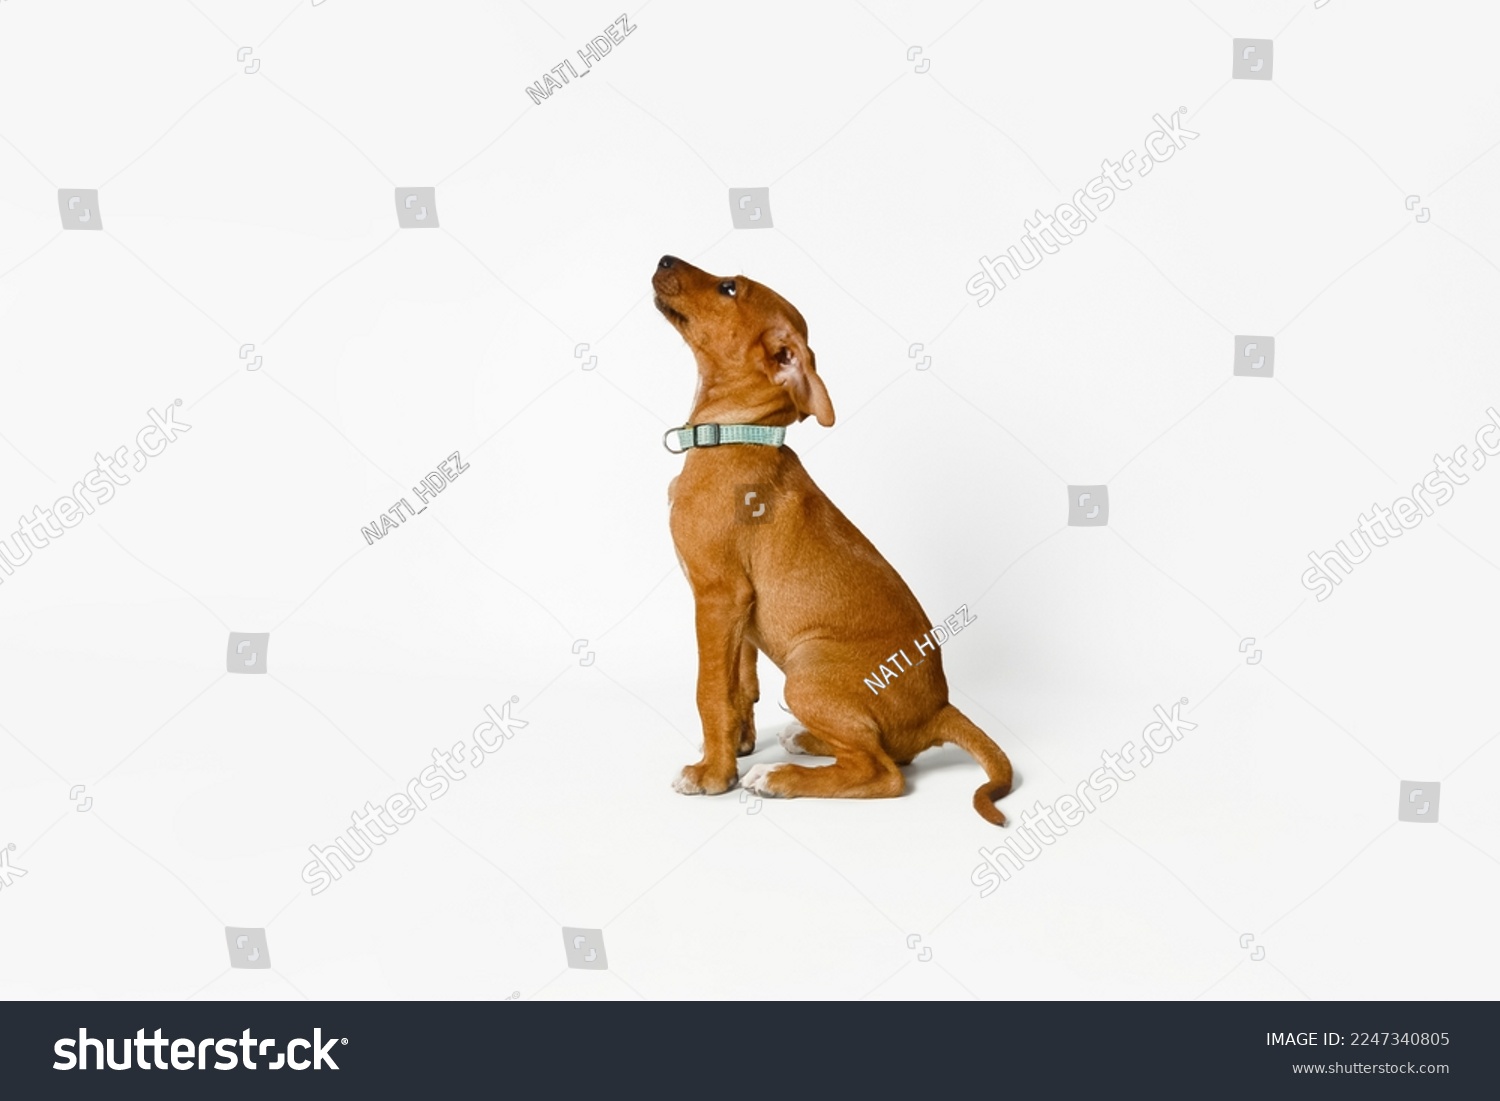 Brown puppy waiting for his treat after being told to sit isolated on white background. #2247340805